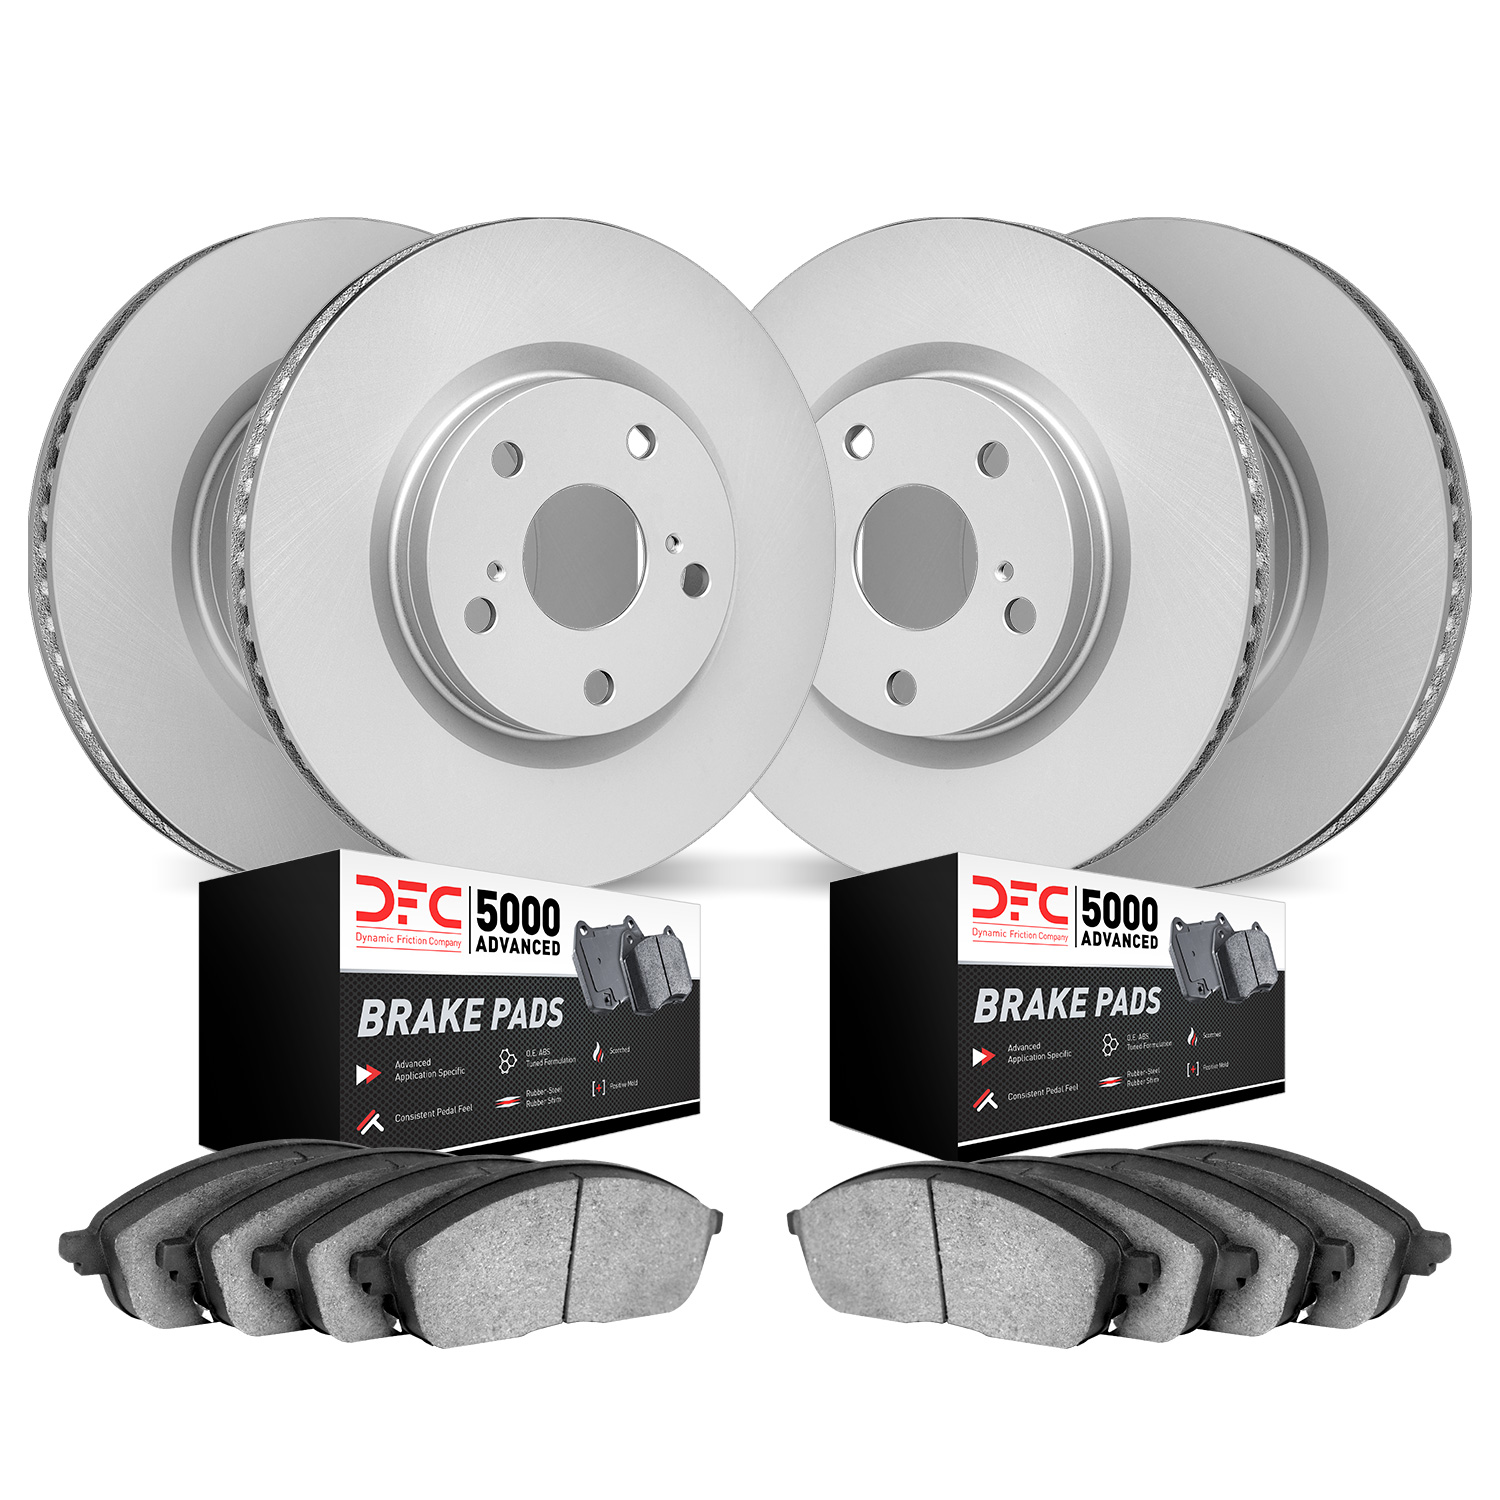 4504-45008 Geospec Brake Rotors w/5000 Advanced Brake Pads Kit, 2009-2009 GM, Position: Front and Rear